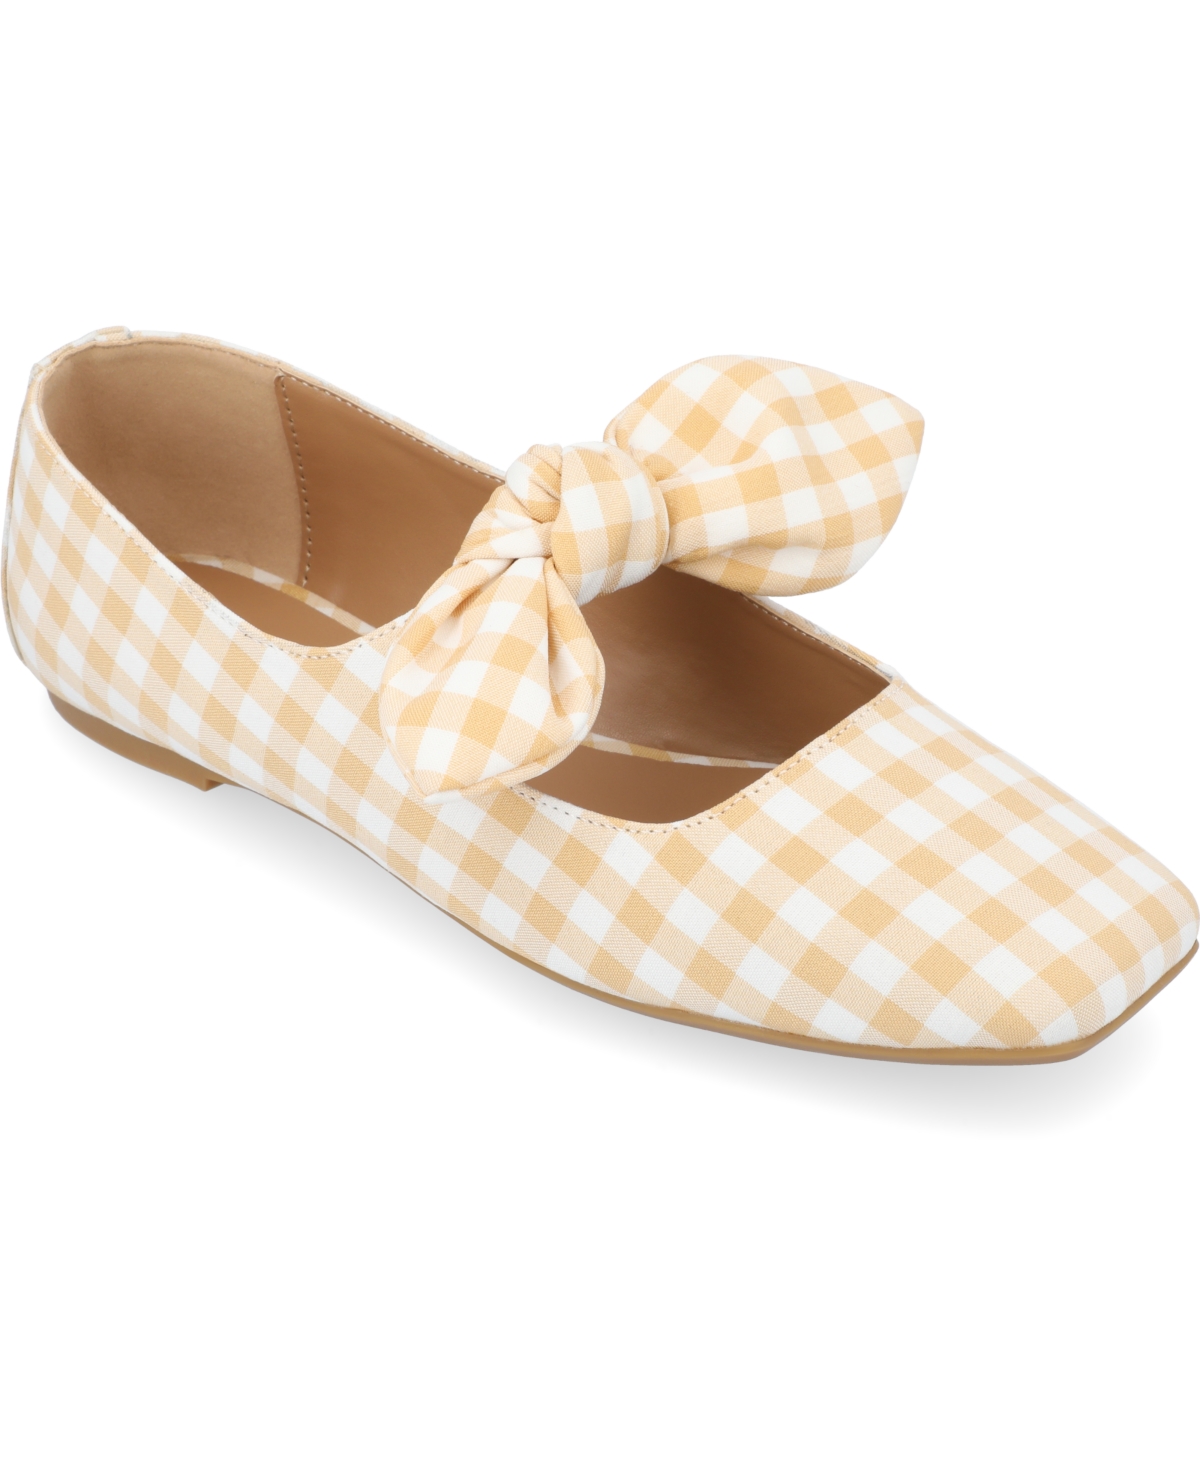 Journee Collection Women's Seralinn Bow Square Toe Flats In Plaid Tan